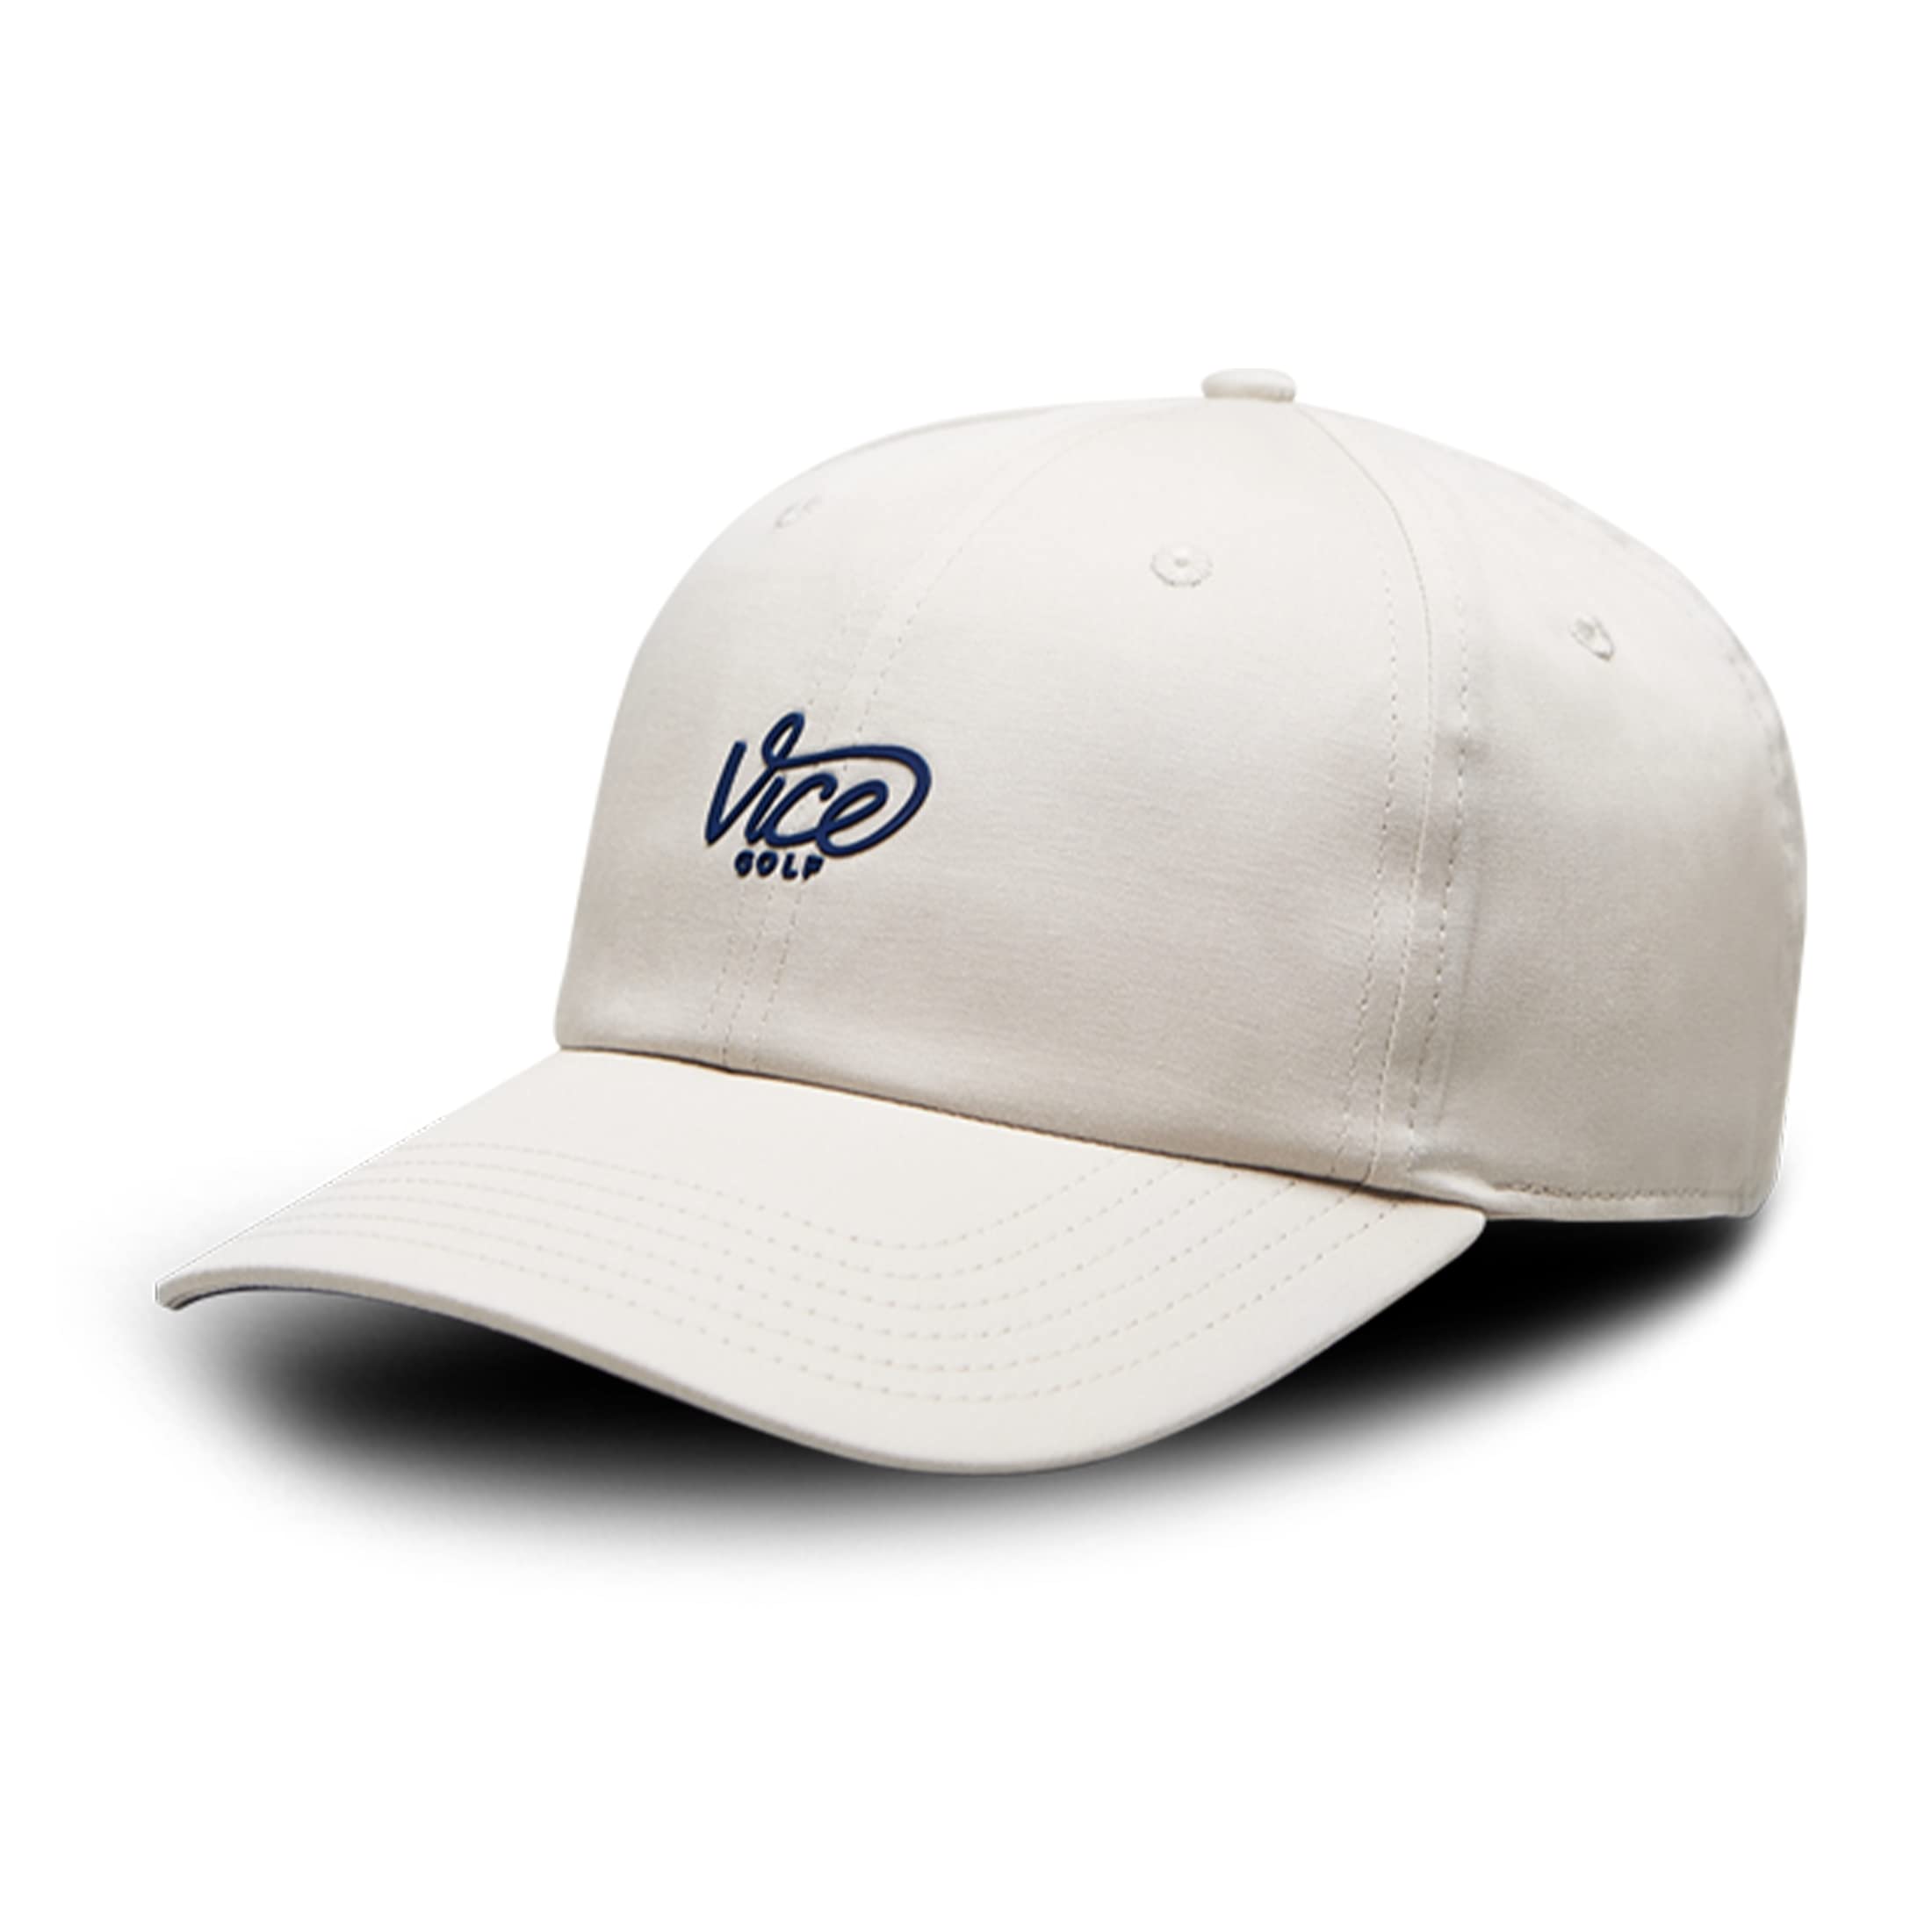 VICE Golf DAD Crew Cap | Multiple Colors | Golf Cap | One Size fits All | Unisex